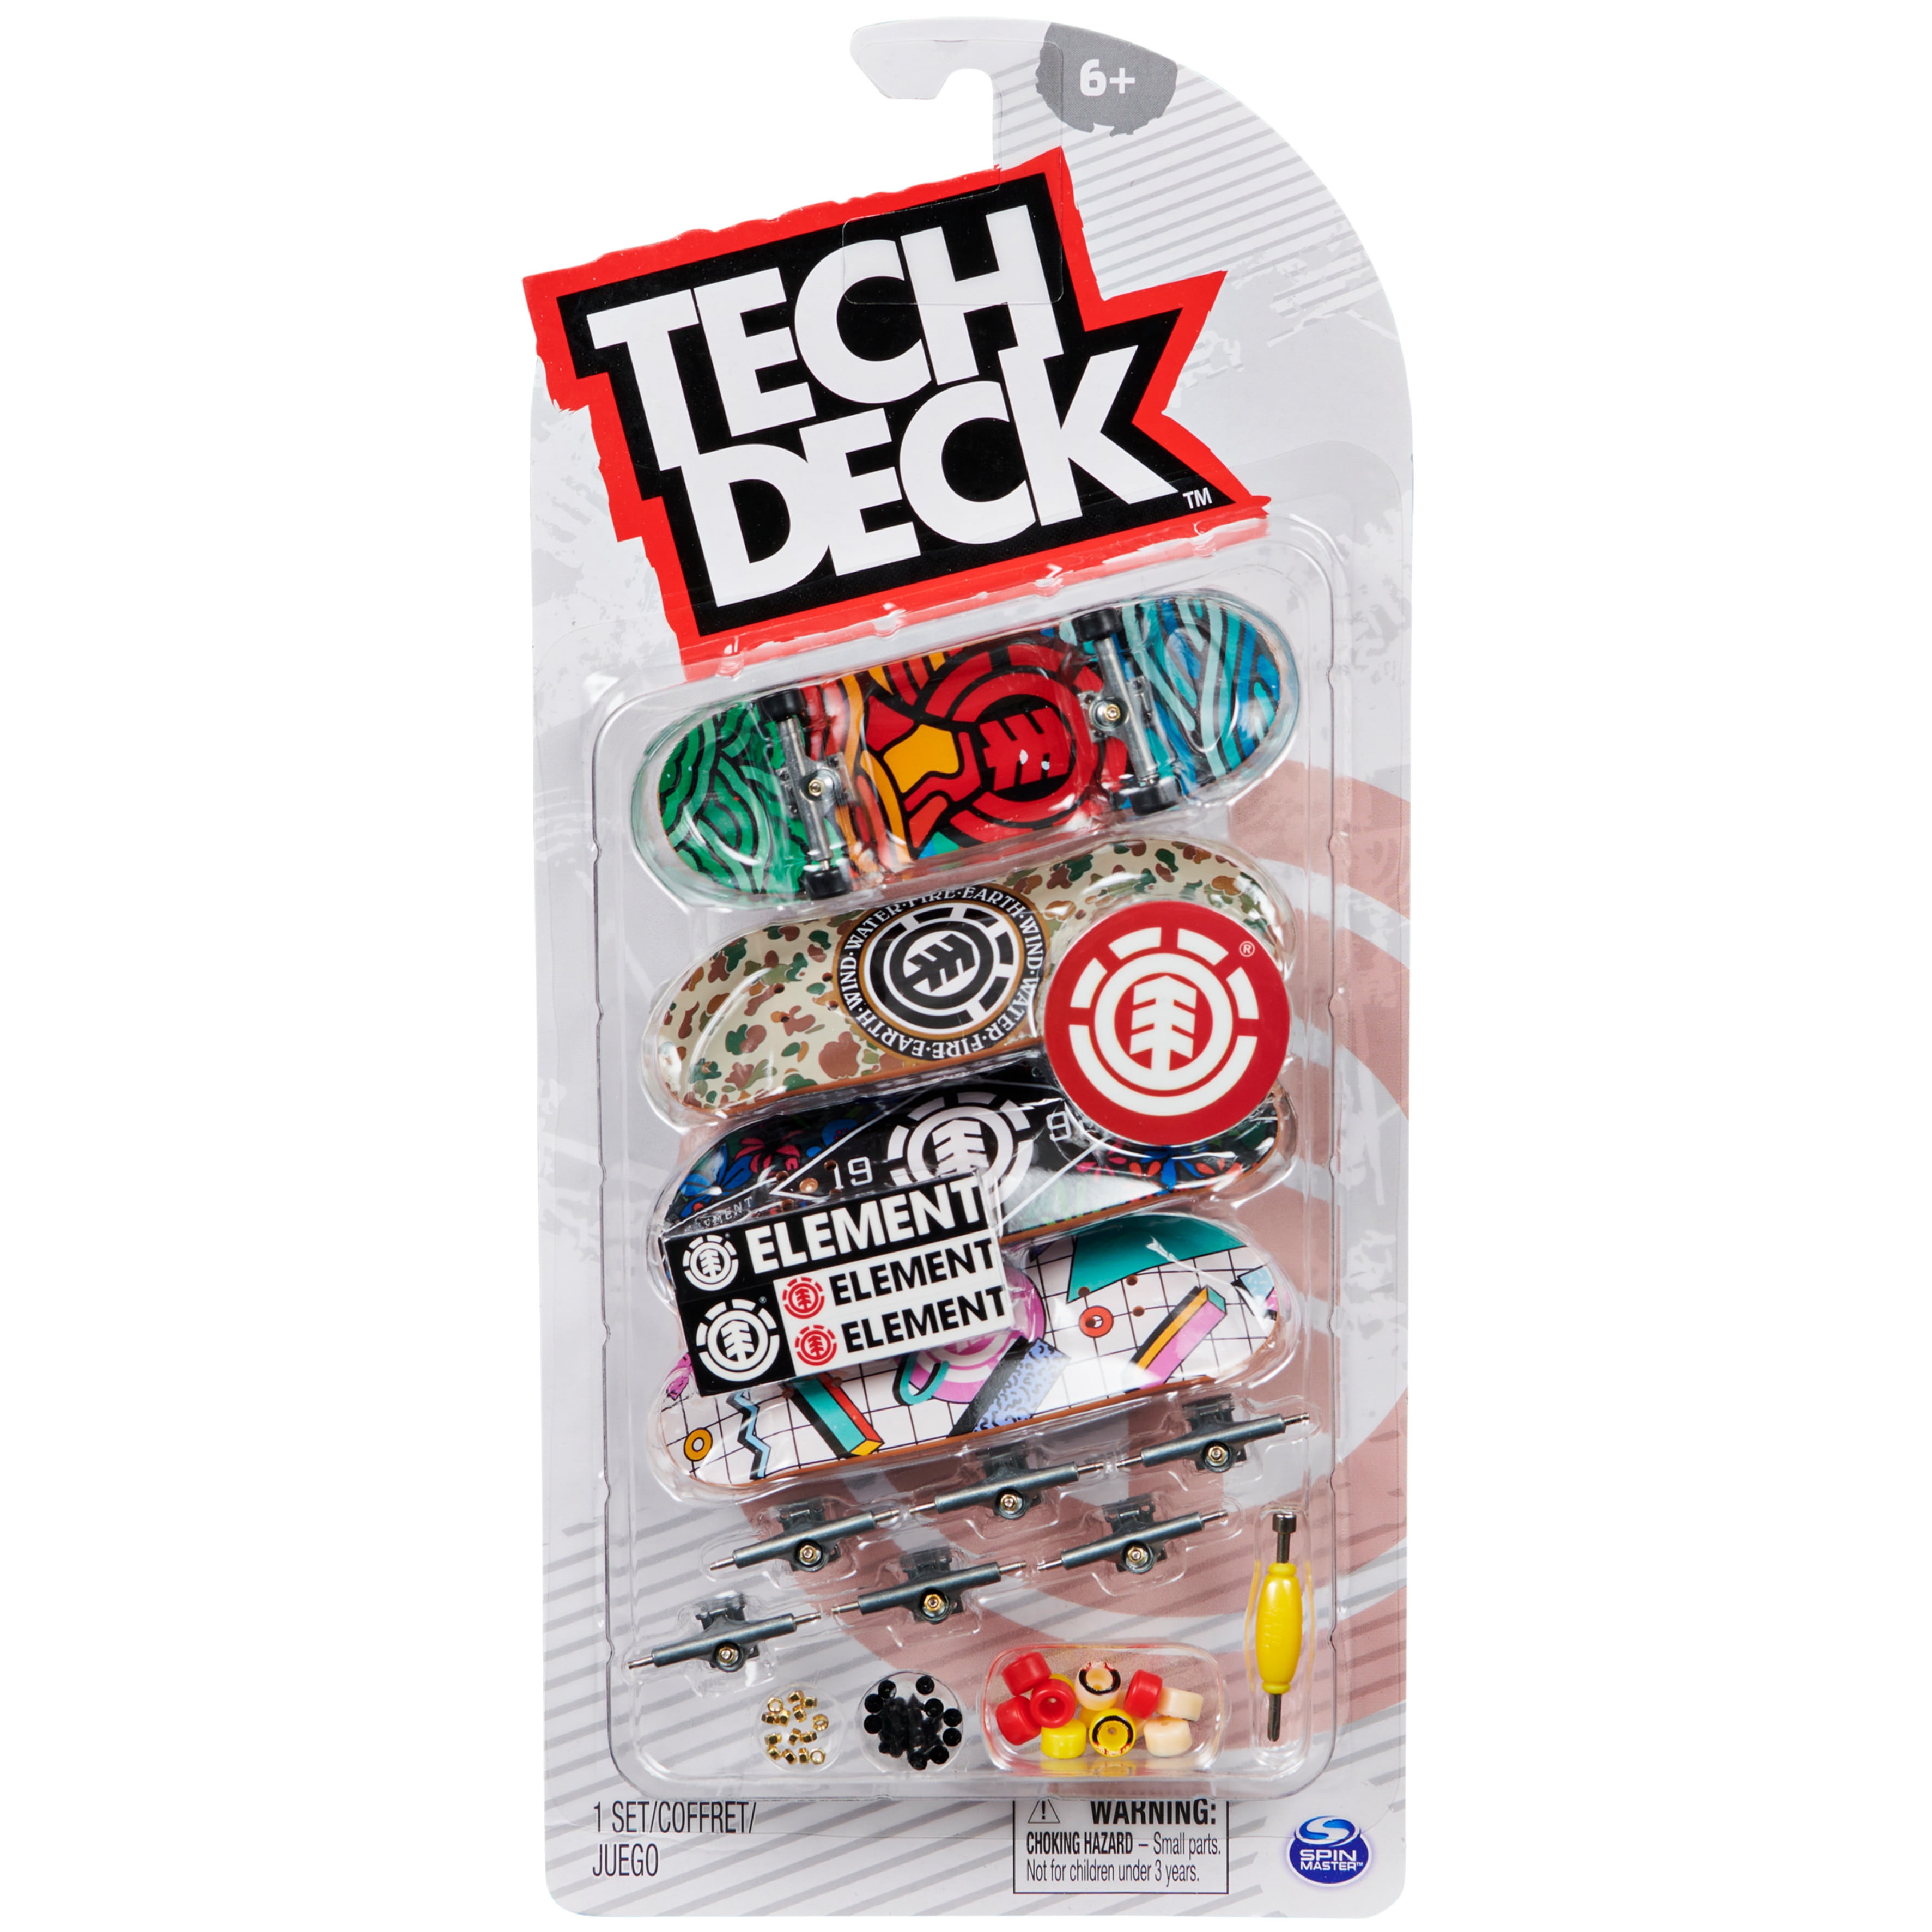 2 Tech Deck Series 13 FINESSE SONIC THANK YOU Grizzly Ultra Rare Fingerboard Lot